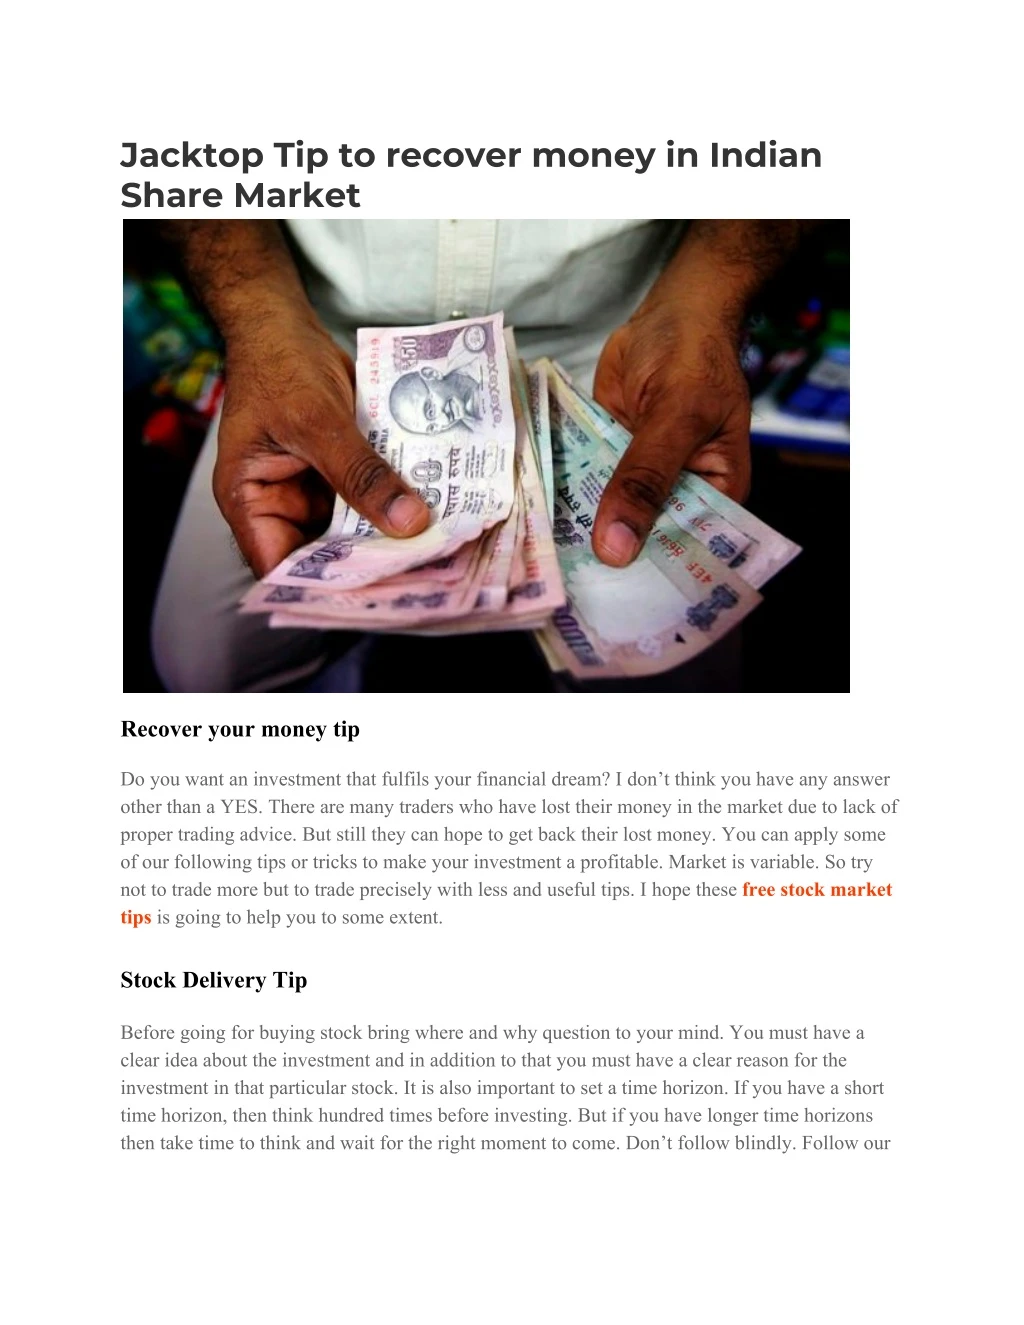 jacktop tip to recover money in indian share